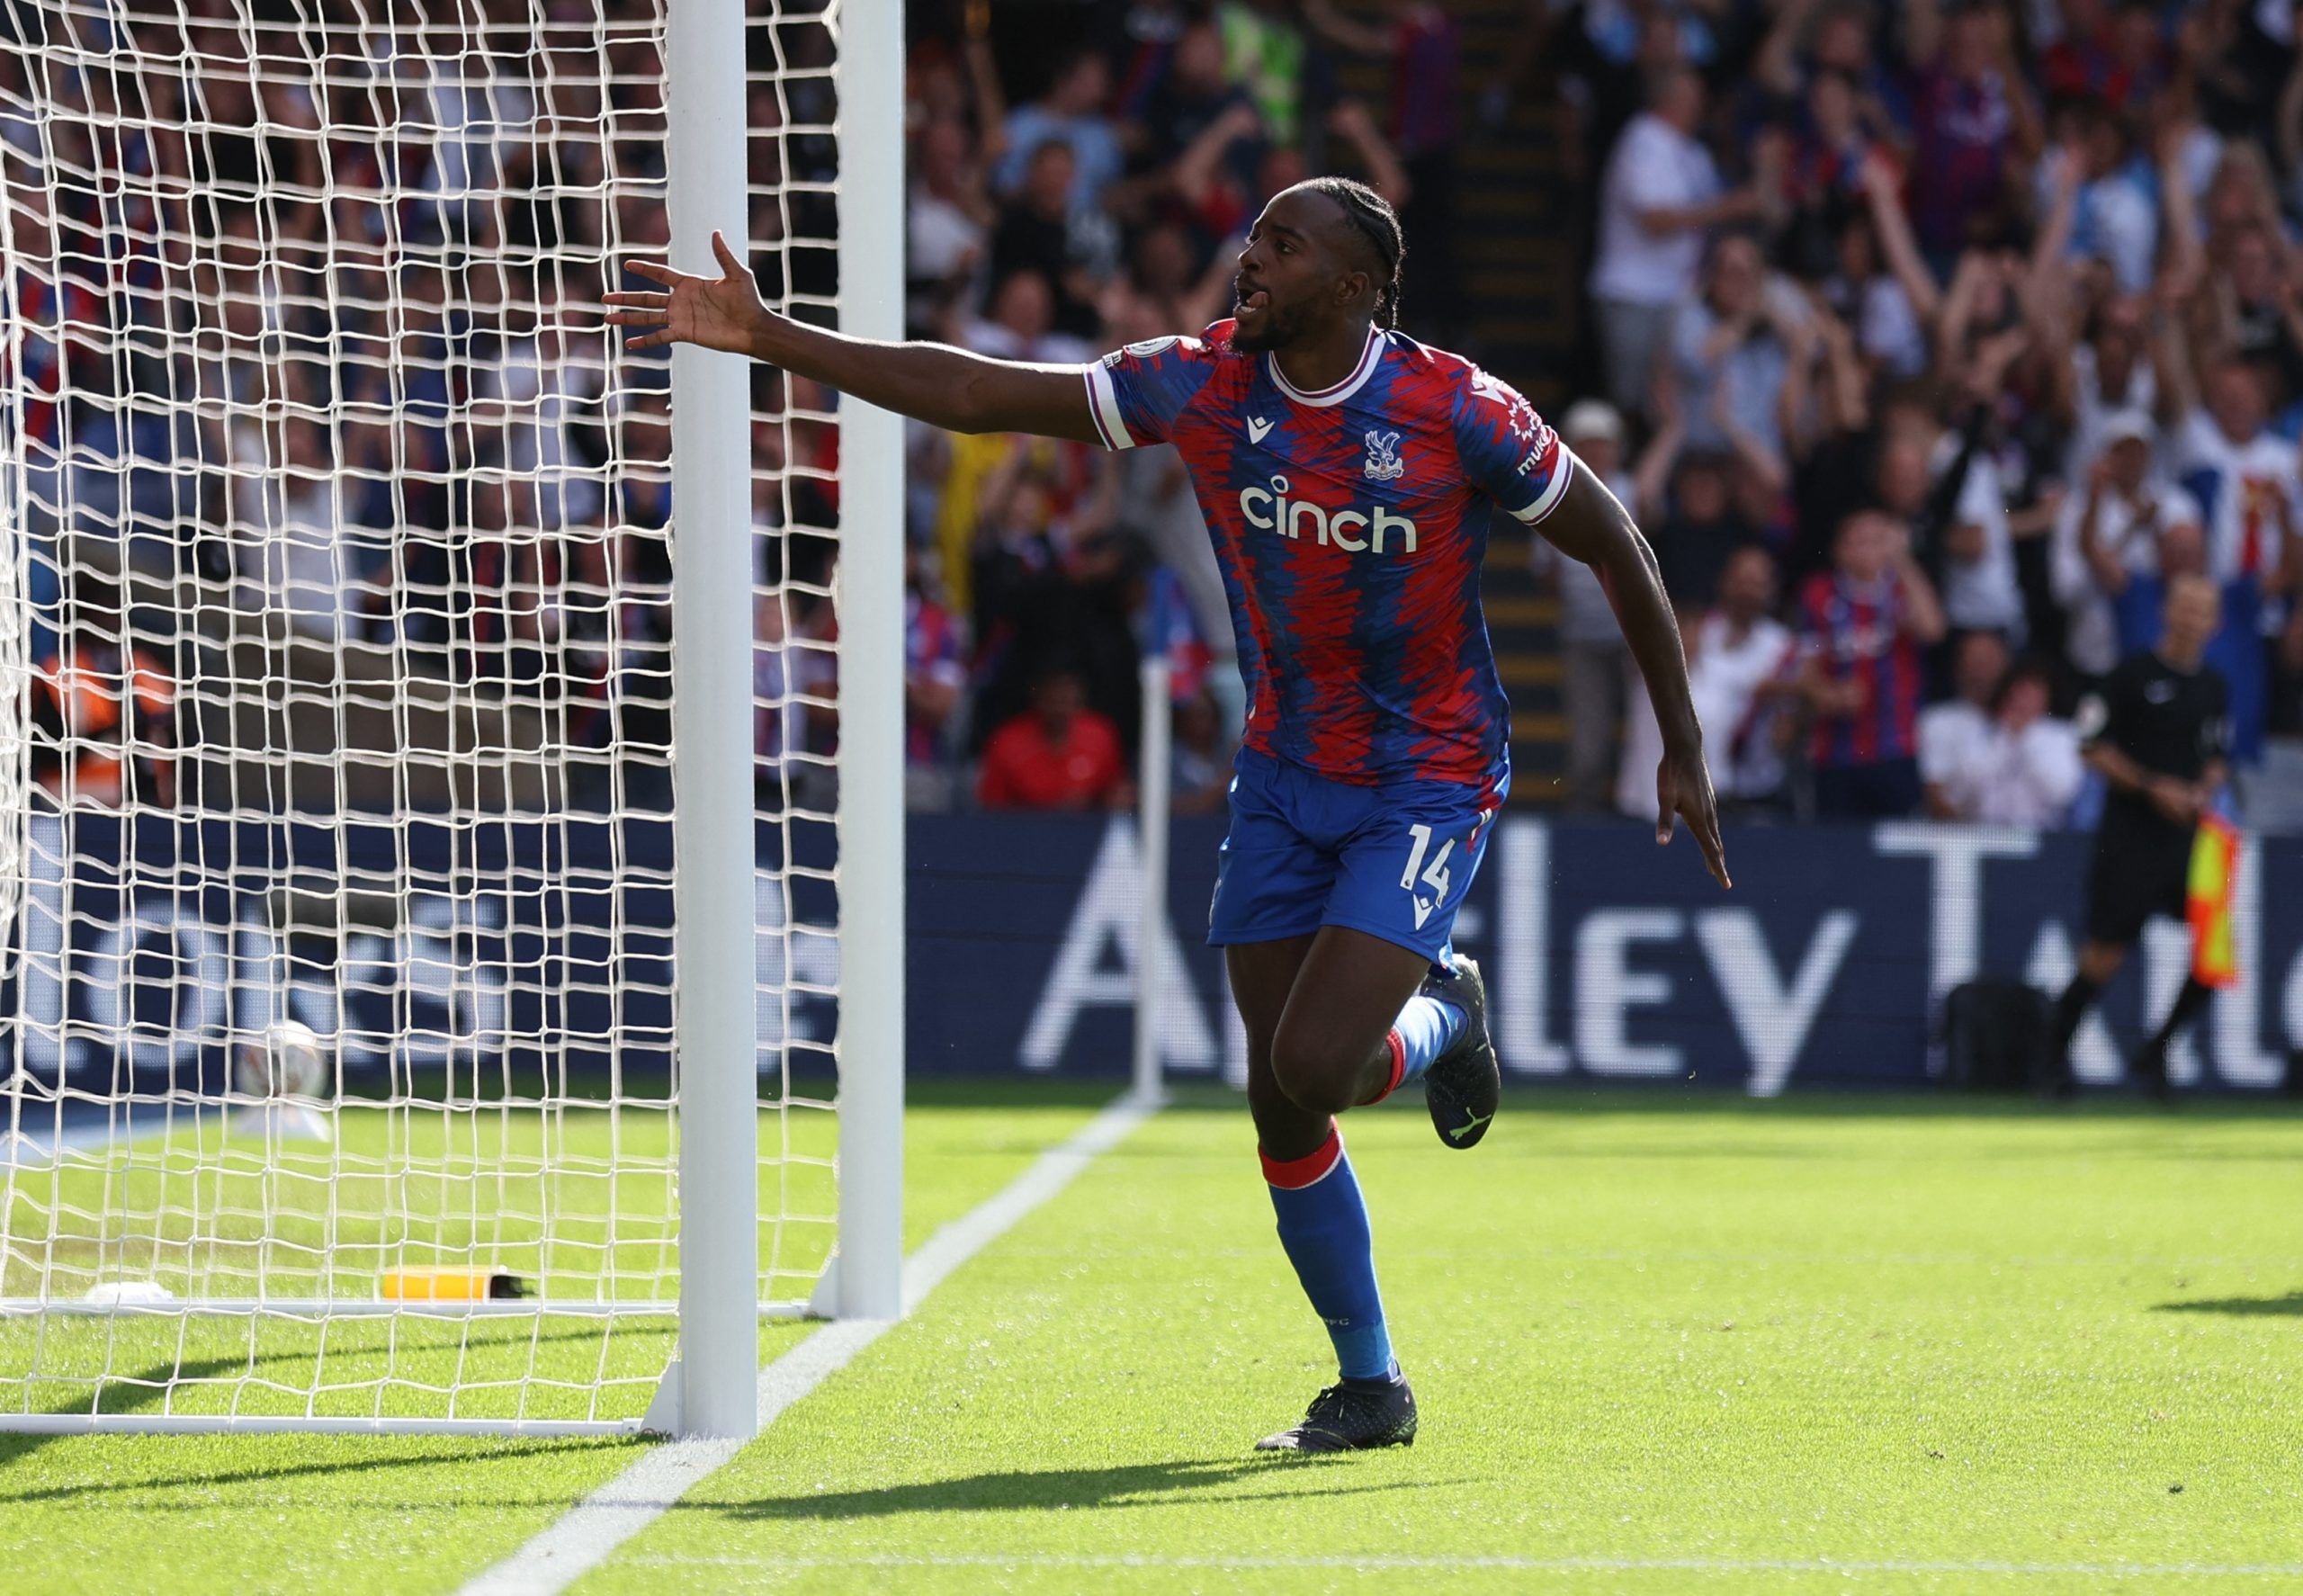 Soccer Football - Premier League - Crystal Palace v Aston Villa - Selhurst Park, London, Britain - August 20, 2022 Crystal Palace's Jean-Philippe Mateta celebrates scoring their third goal REUTERS/Ian Walton EDITORIAL USE ONLY. No use with unauthorized audio, video, data, fixture lists, club/league logos or 'live' services. Online in-match use limited to 75 images, no video emulation. No use in betting, games or single club /league/player publications.  Please contact your account representative